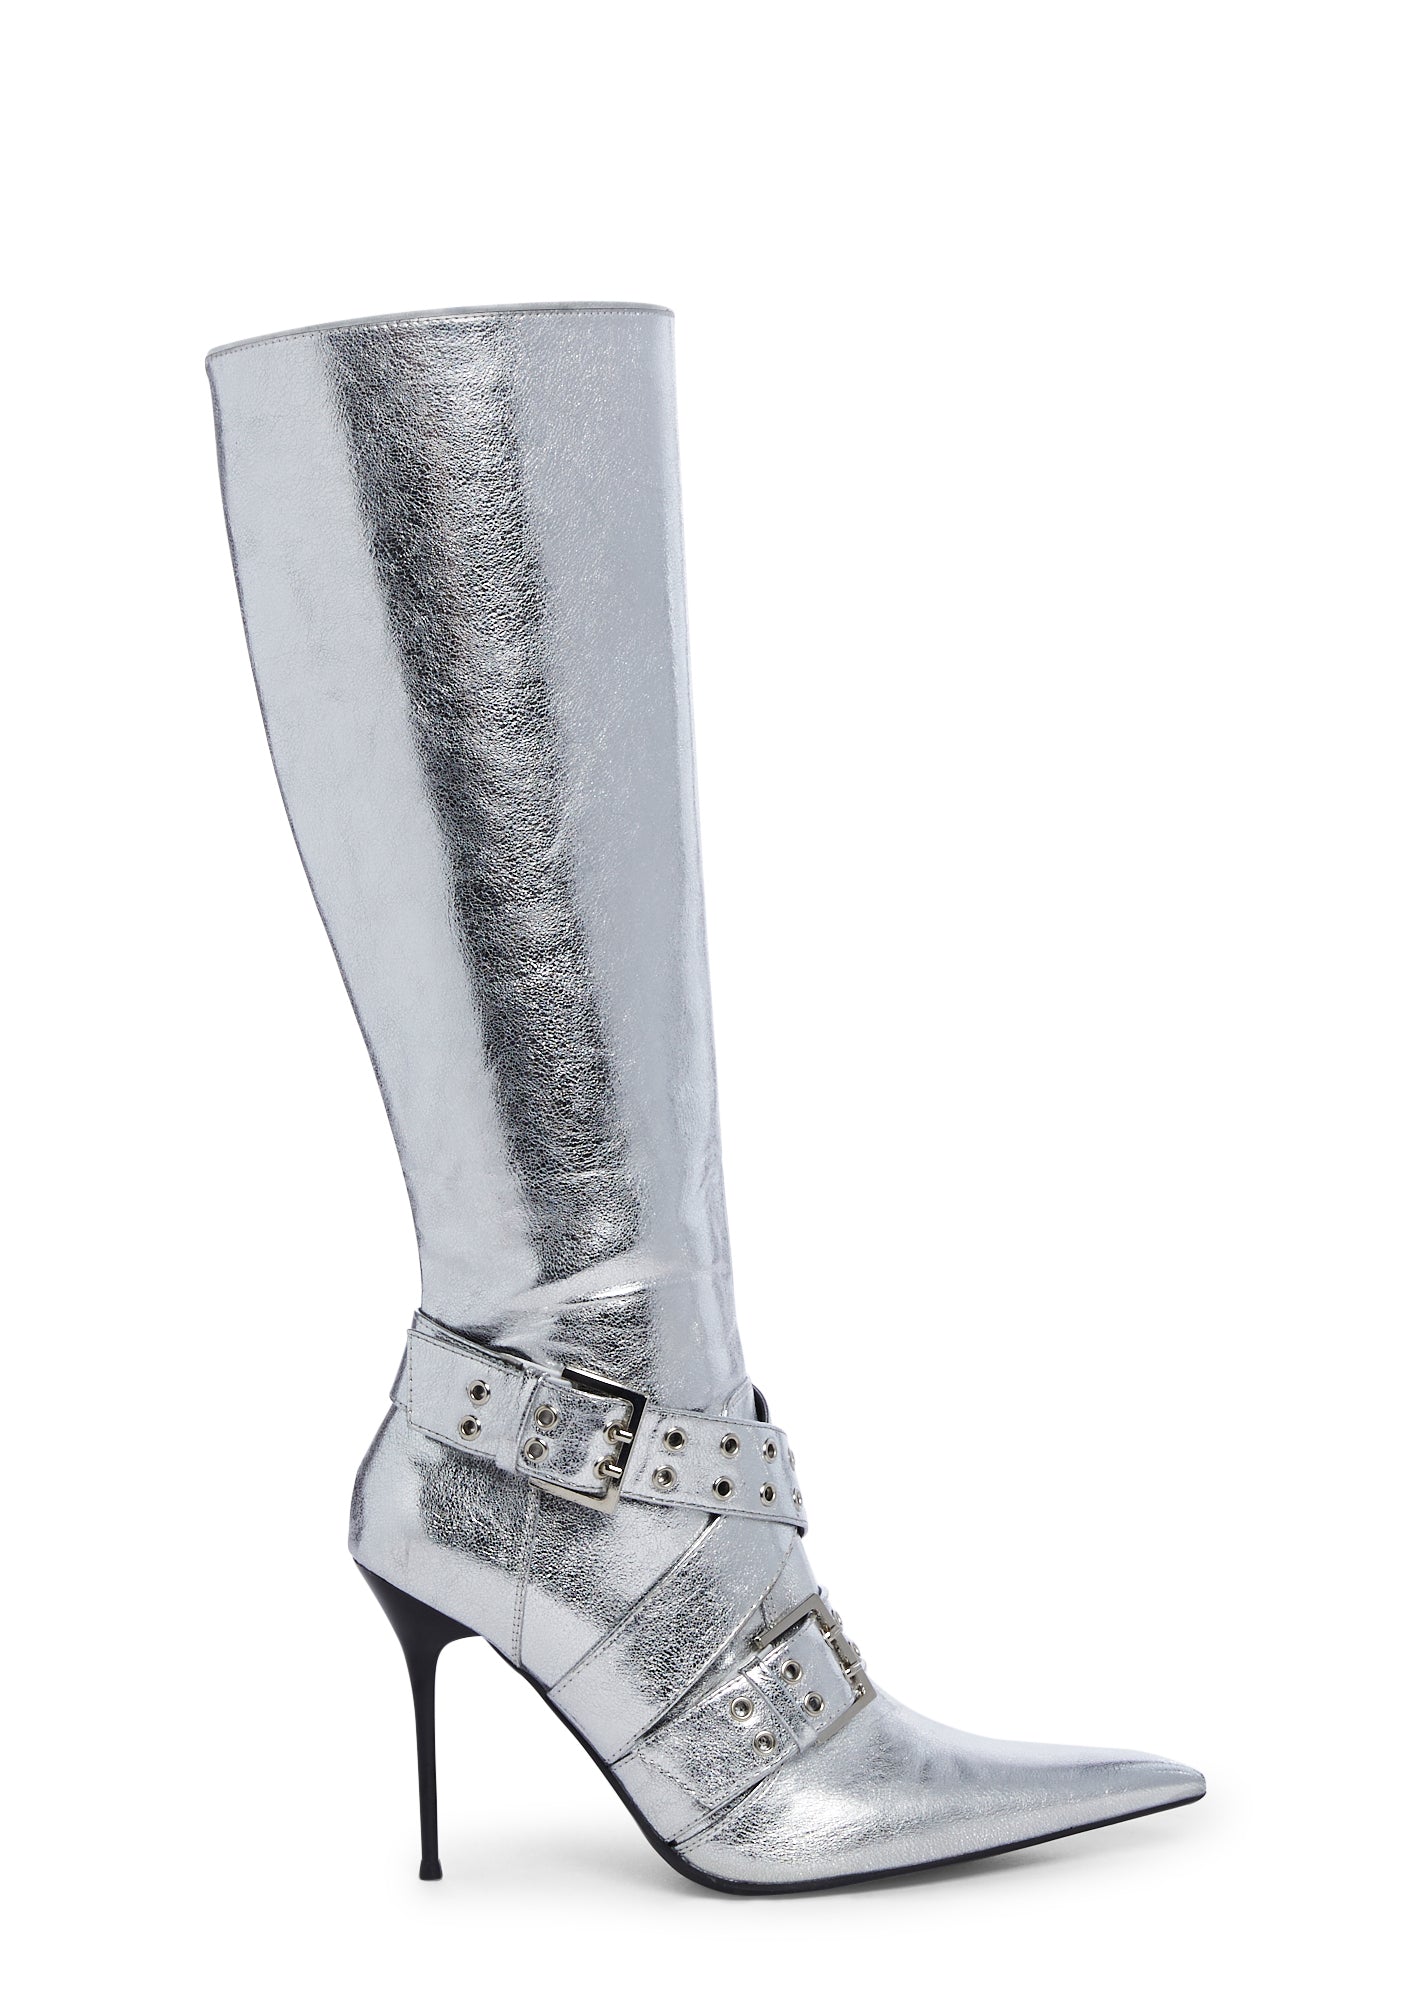 Generation Kiss Metallic Pointed Toe Buckle Knee High Boots - Silver ...